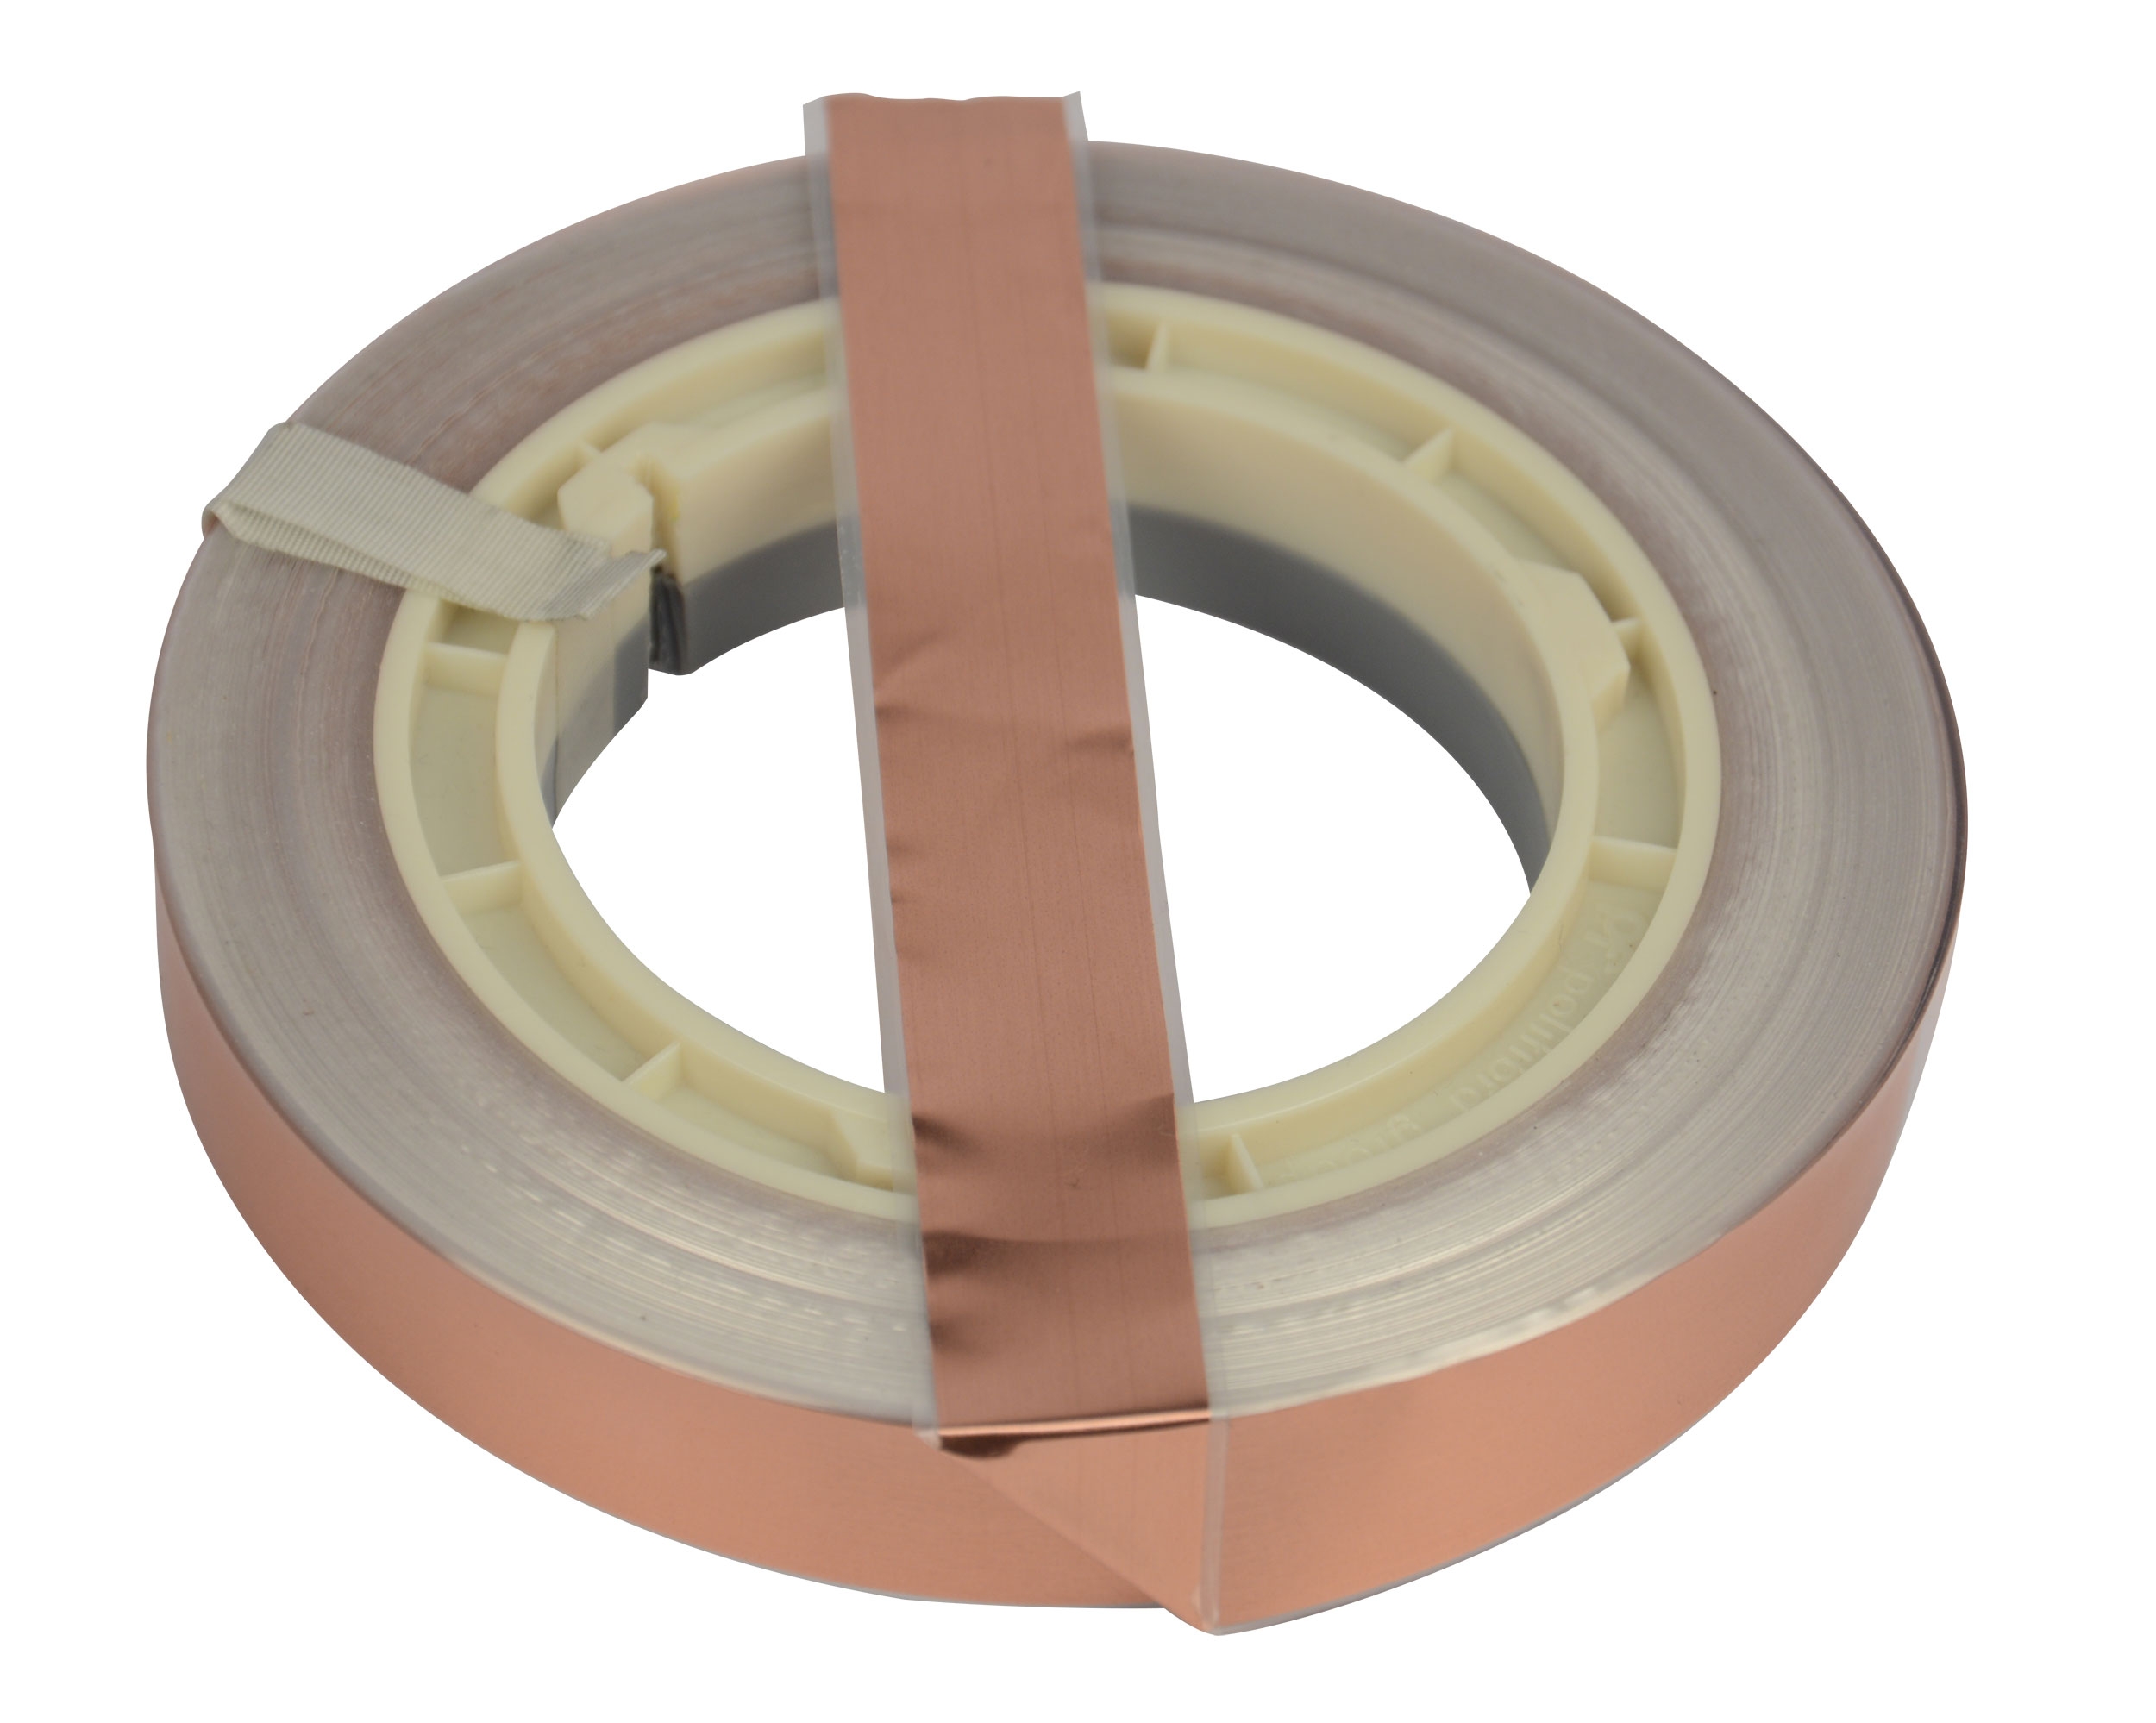 Copper tape 100m long - 18mm wide and 0.1mm thick